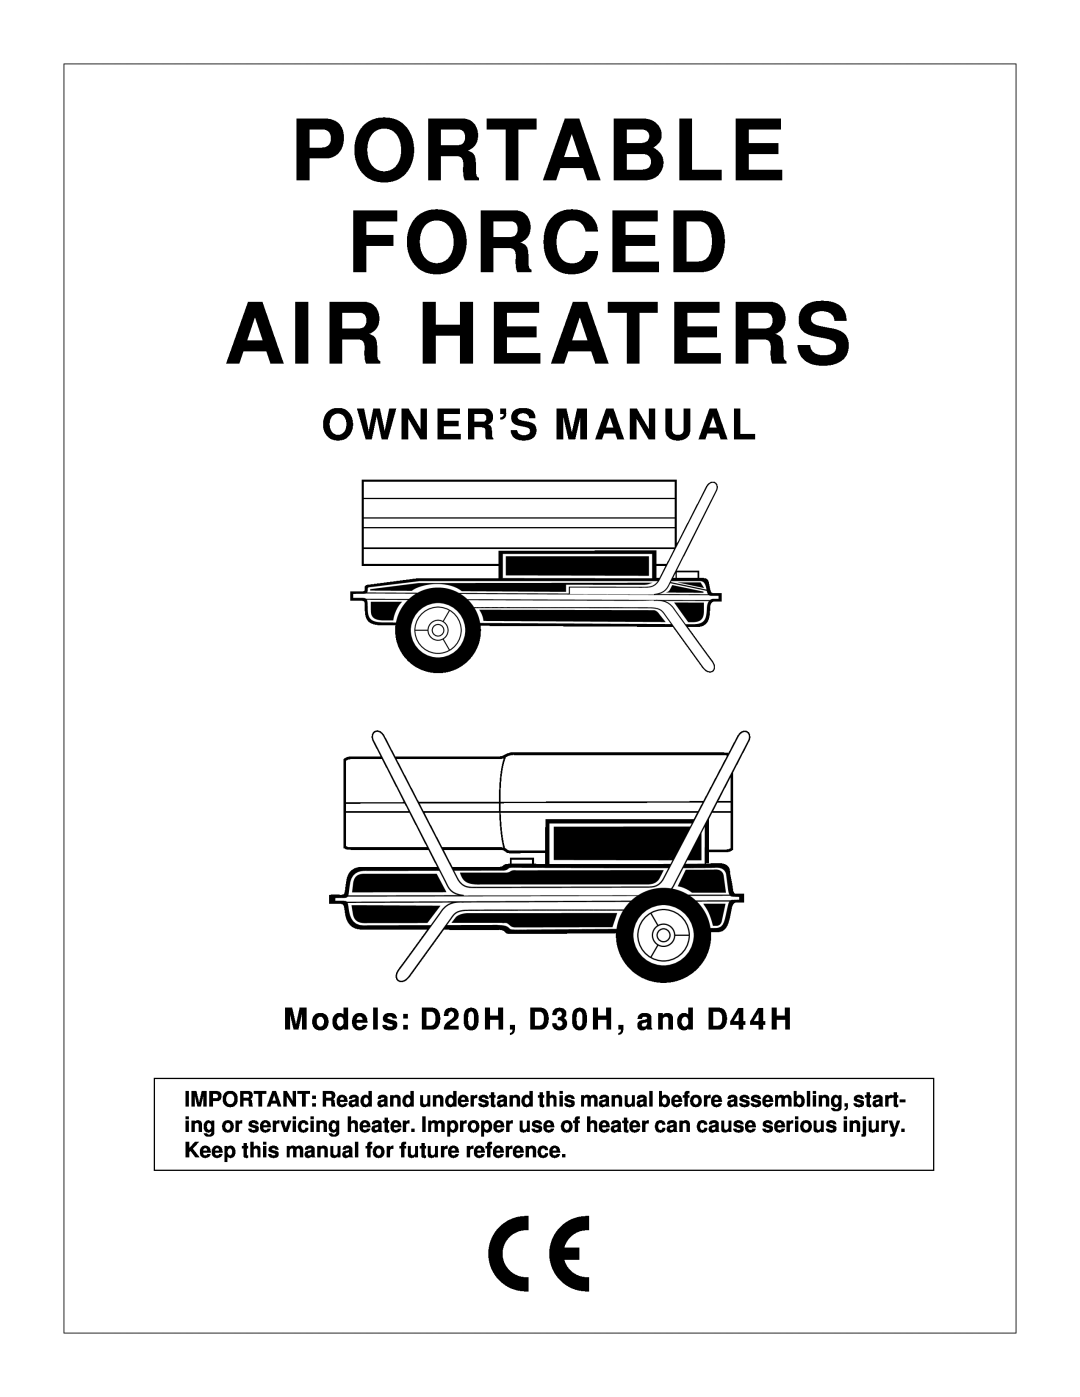 Desa owner manual Portable Forced Air Heaters, Models D20H, D30H, and D44H 